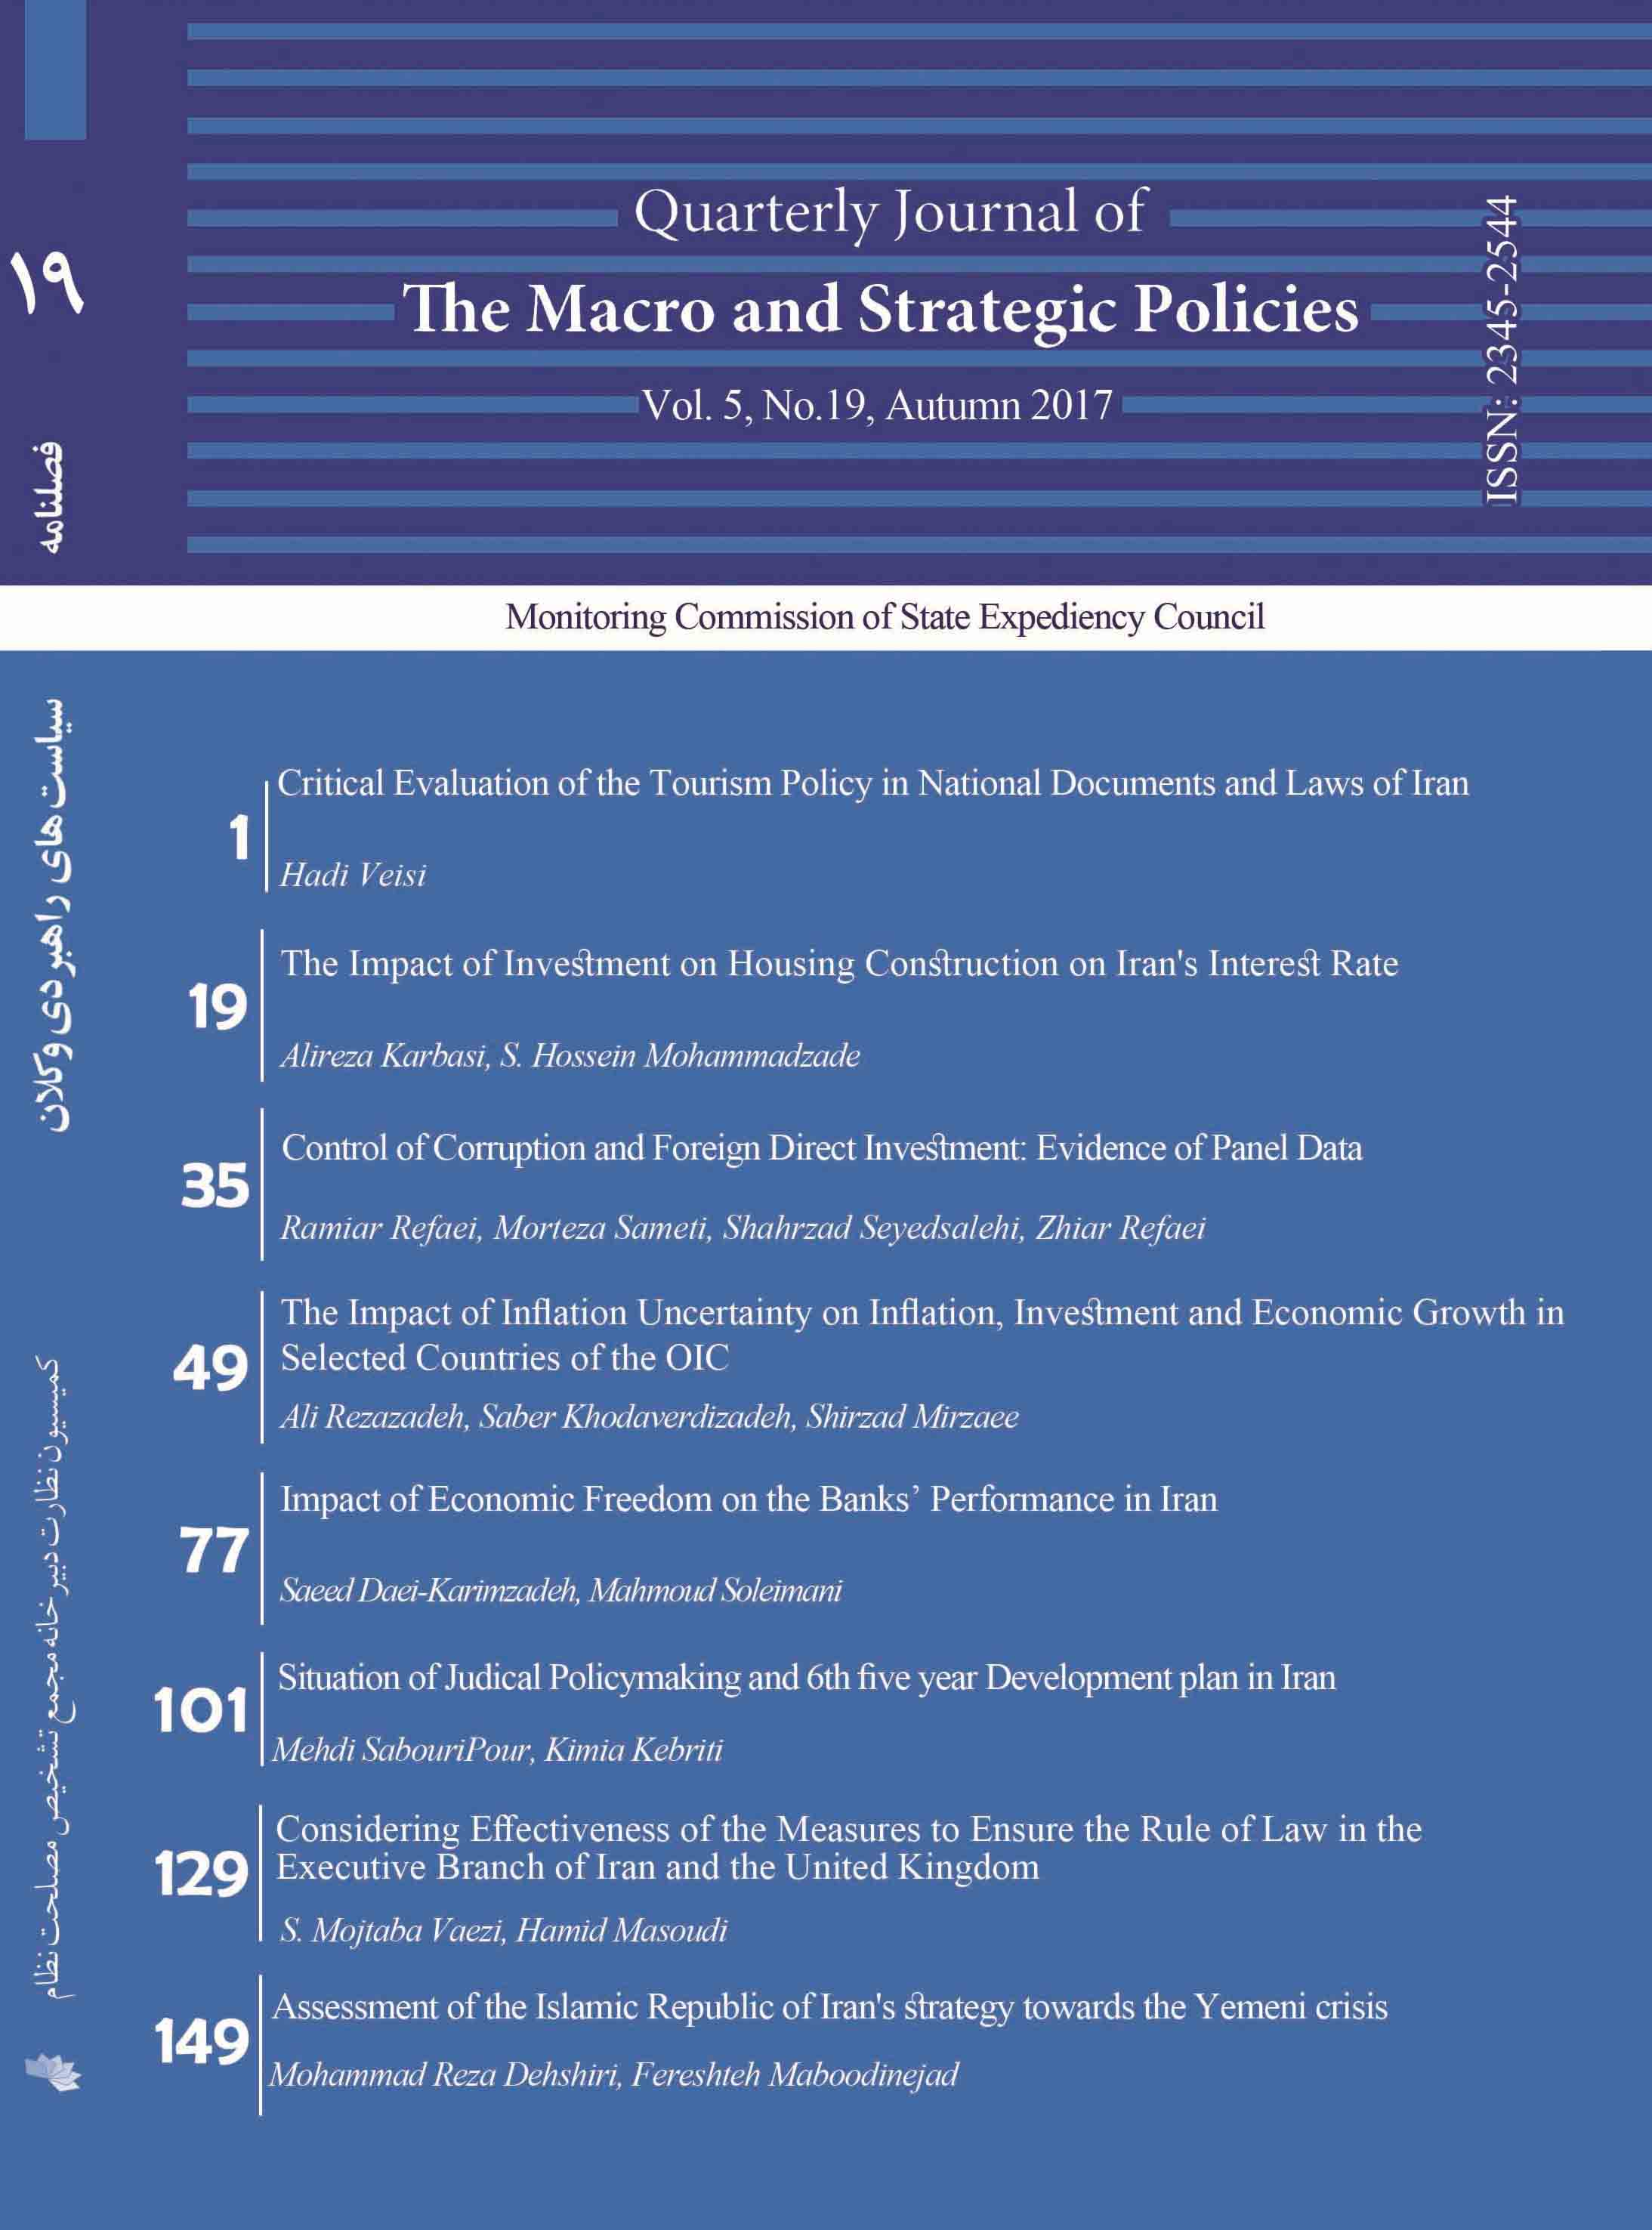 Quarterly Journal of The Macro and Strategic Policies